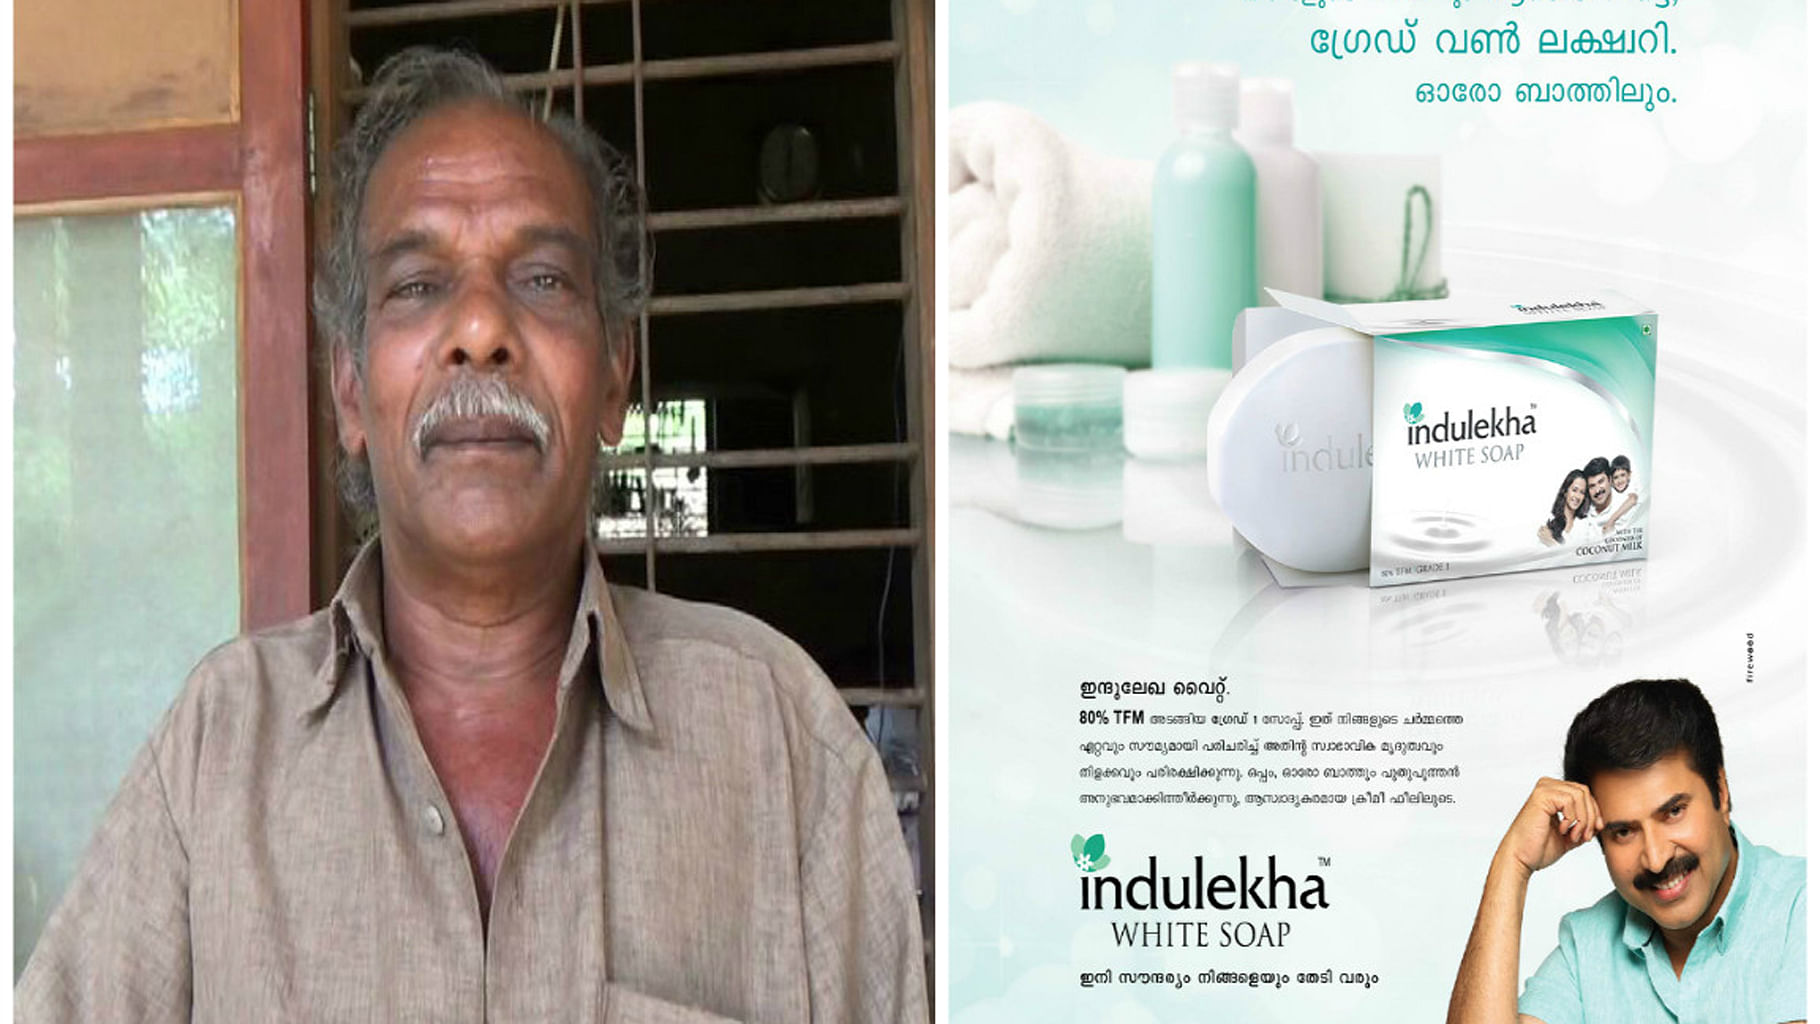 67-yr-old who didn’t get ‘fair’ using Mammootty-endorsed Indulekha soap ‘vindicated’. (Photo Courtesy: The News Minute)